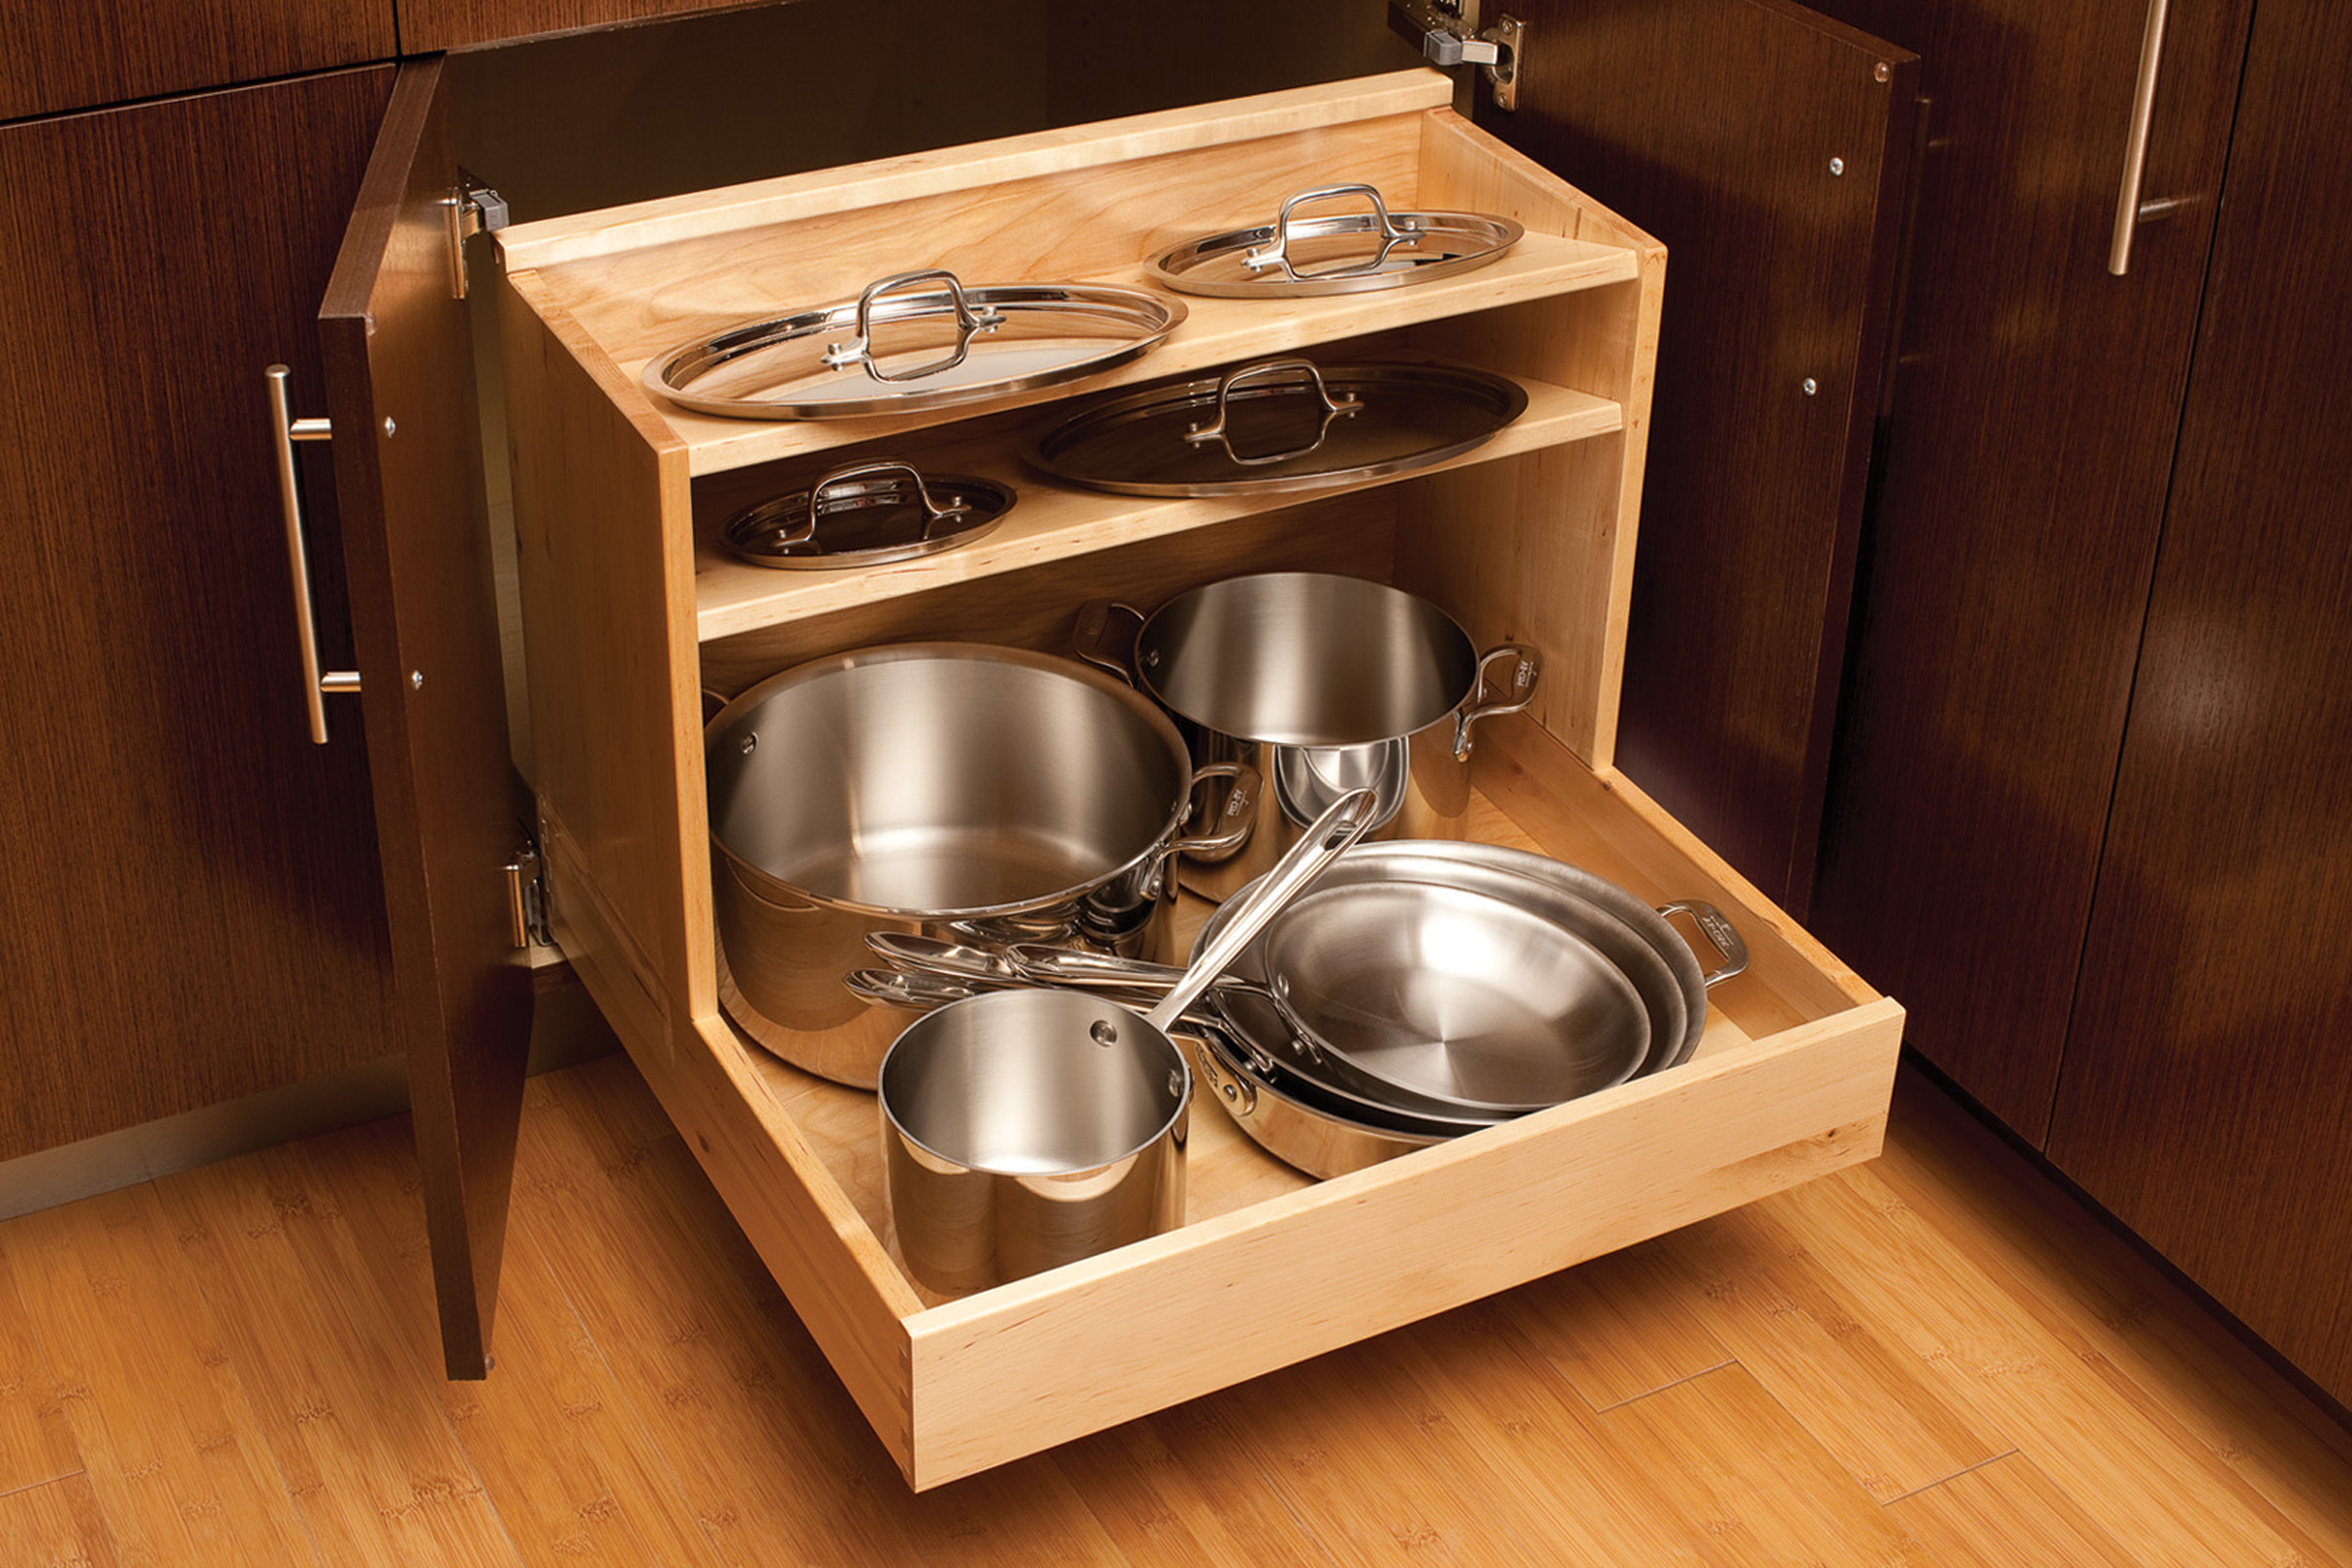 An entire cookware collection can be organized neatly in this single pull-out that houses pots and pans in the lower section and organizes lids above.